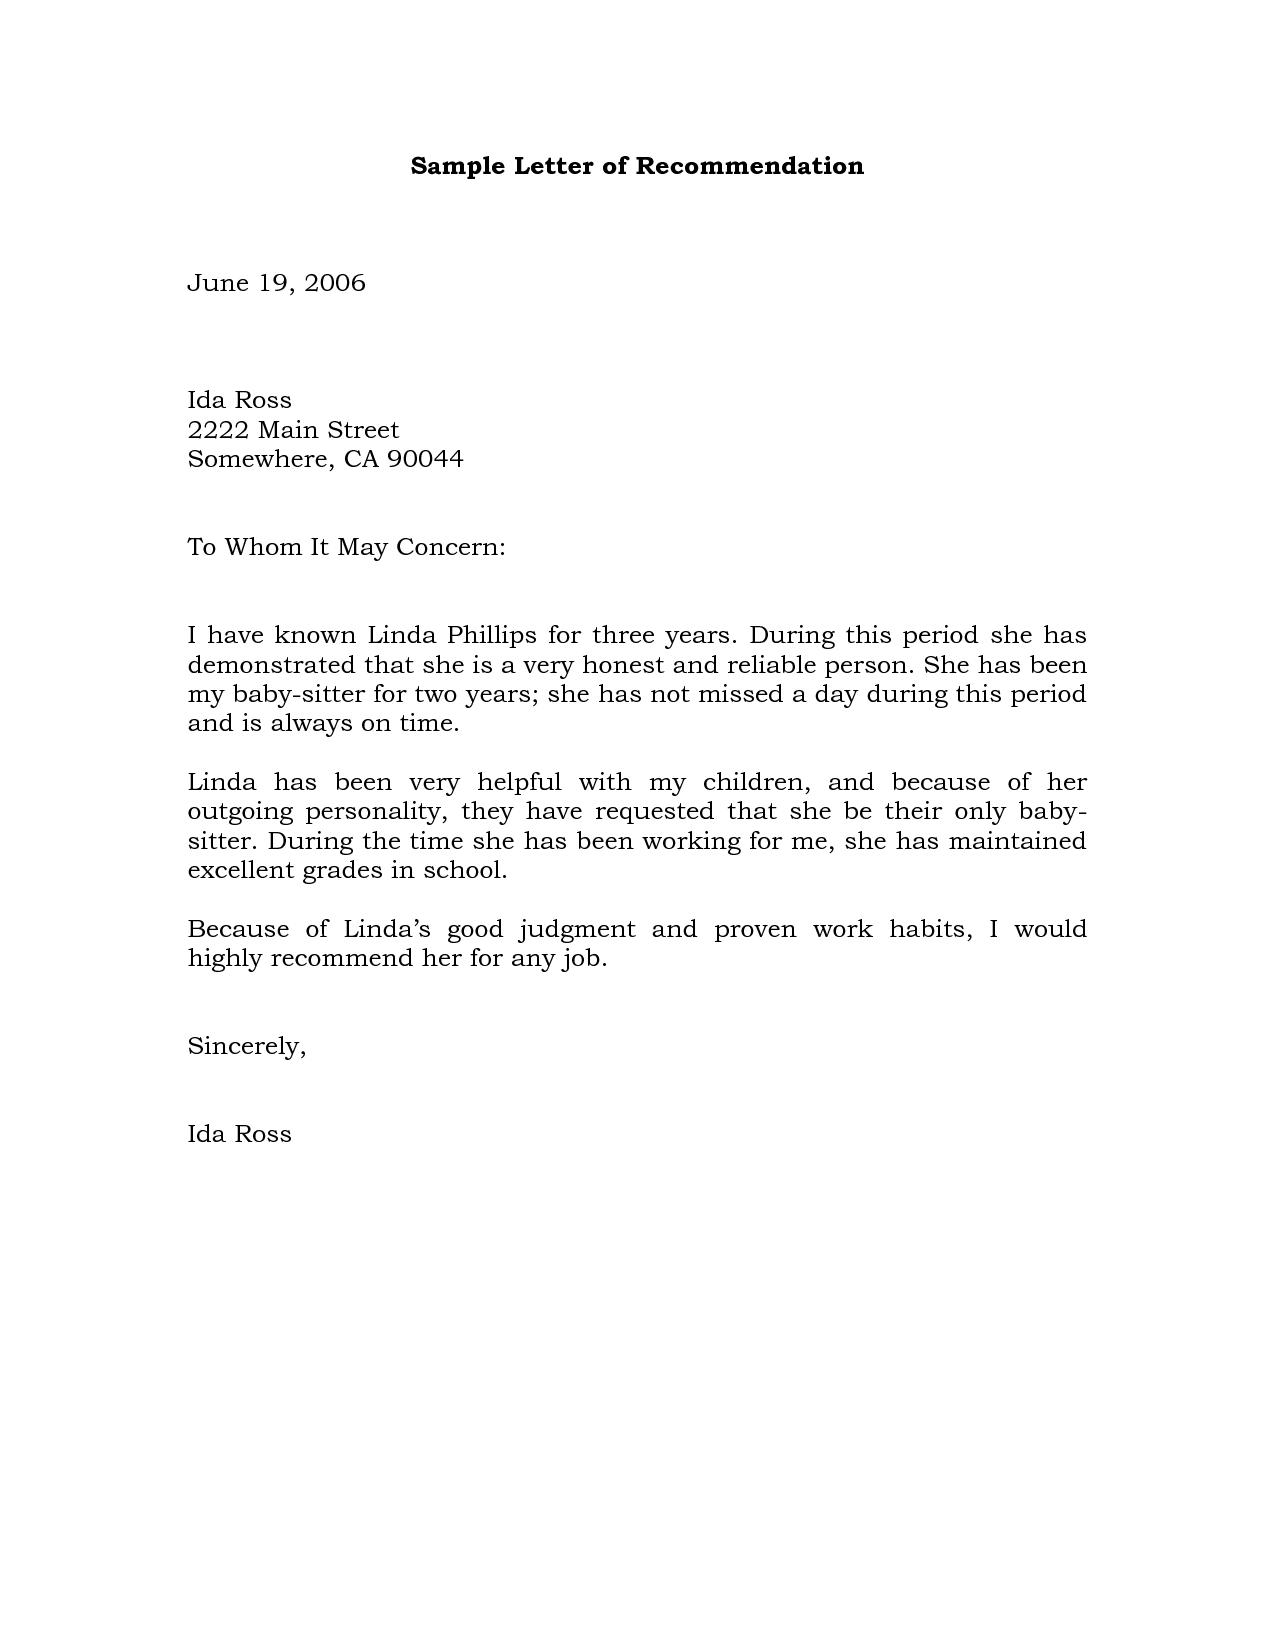 Sample Recommendation Letter Example | Projects to Try | Pinterest 